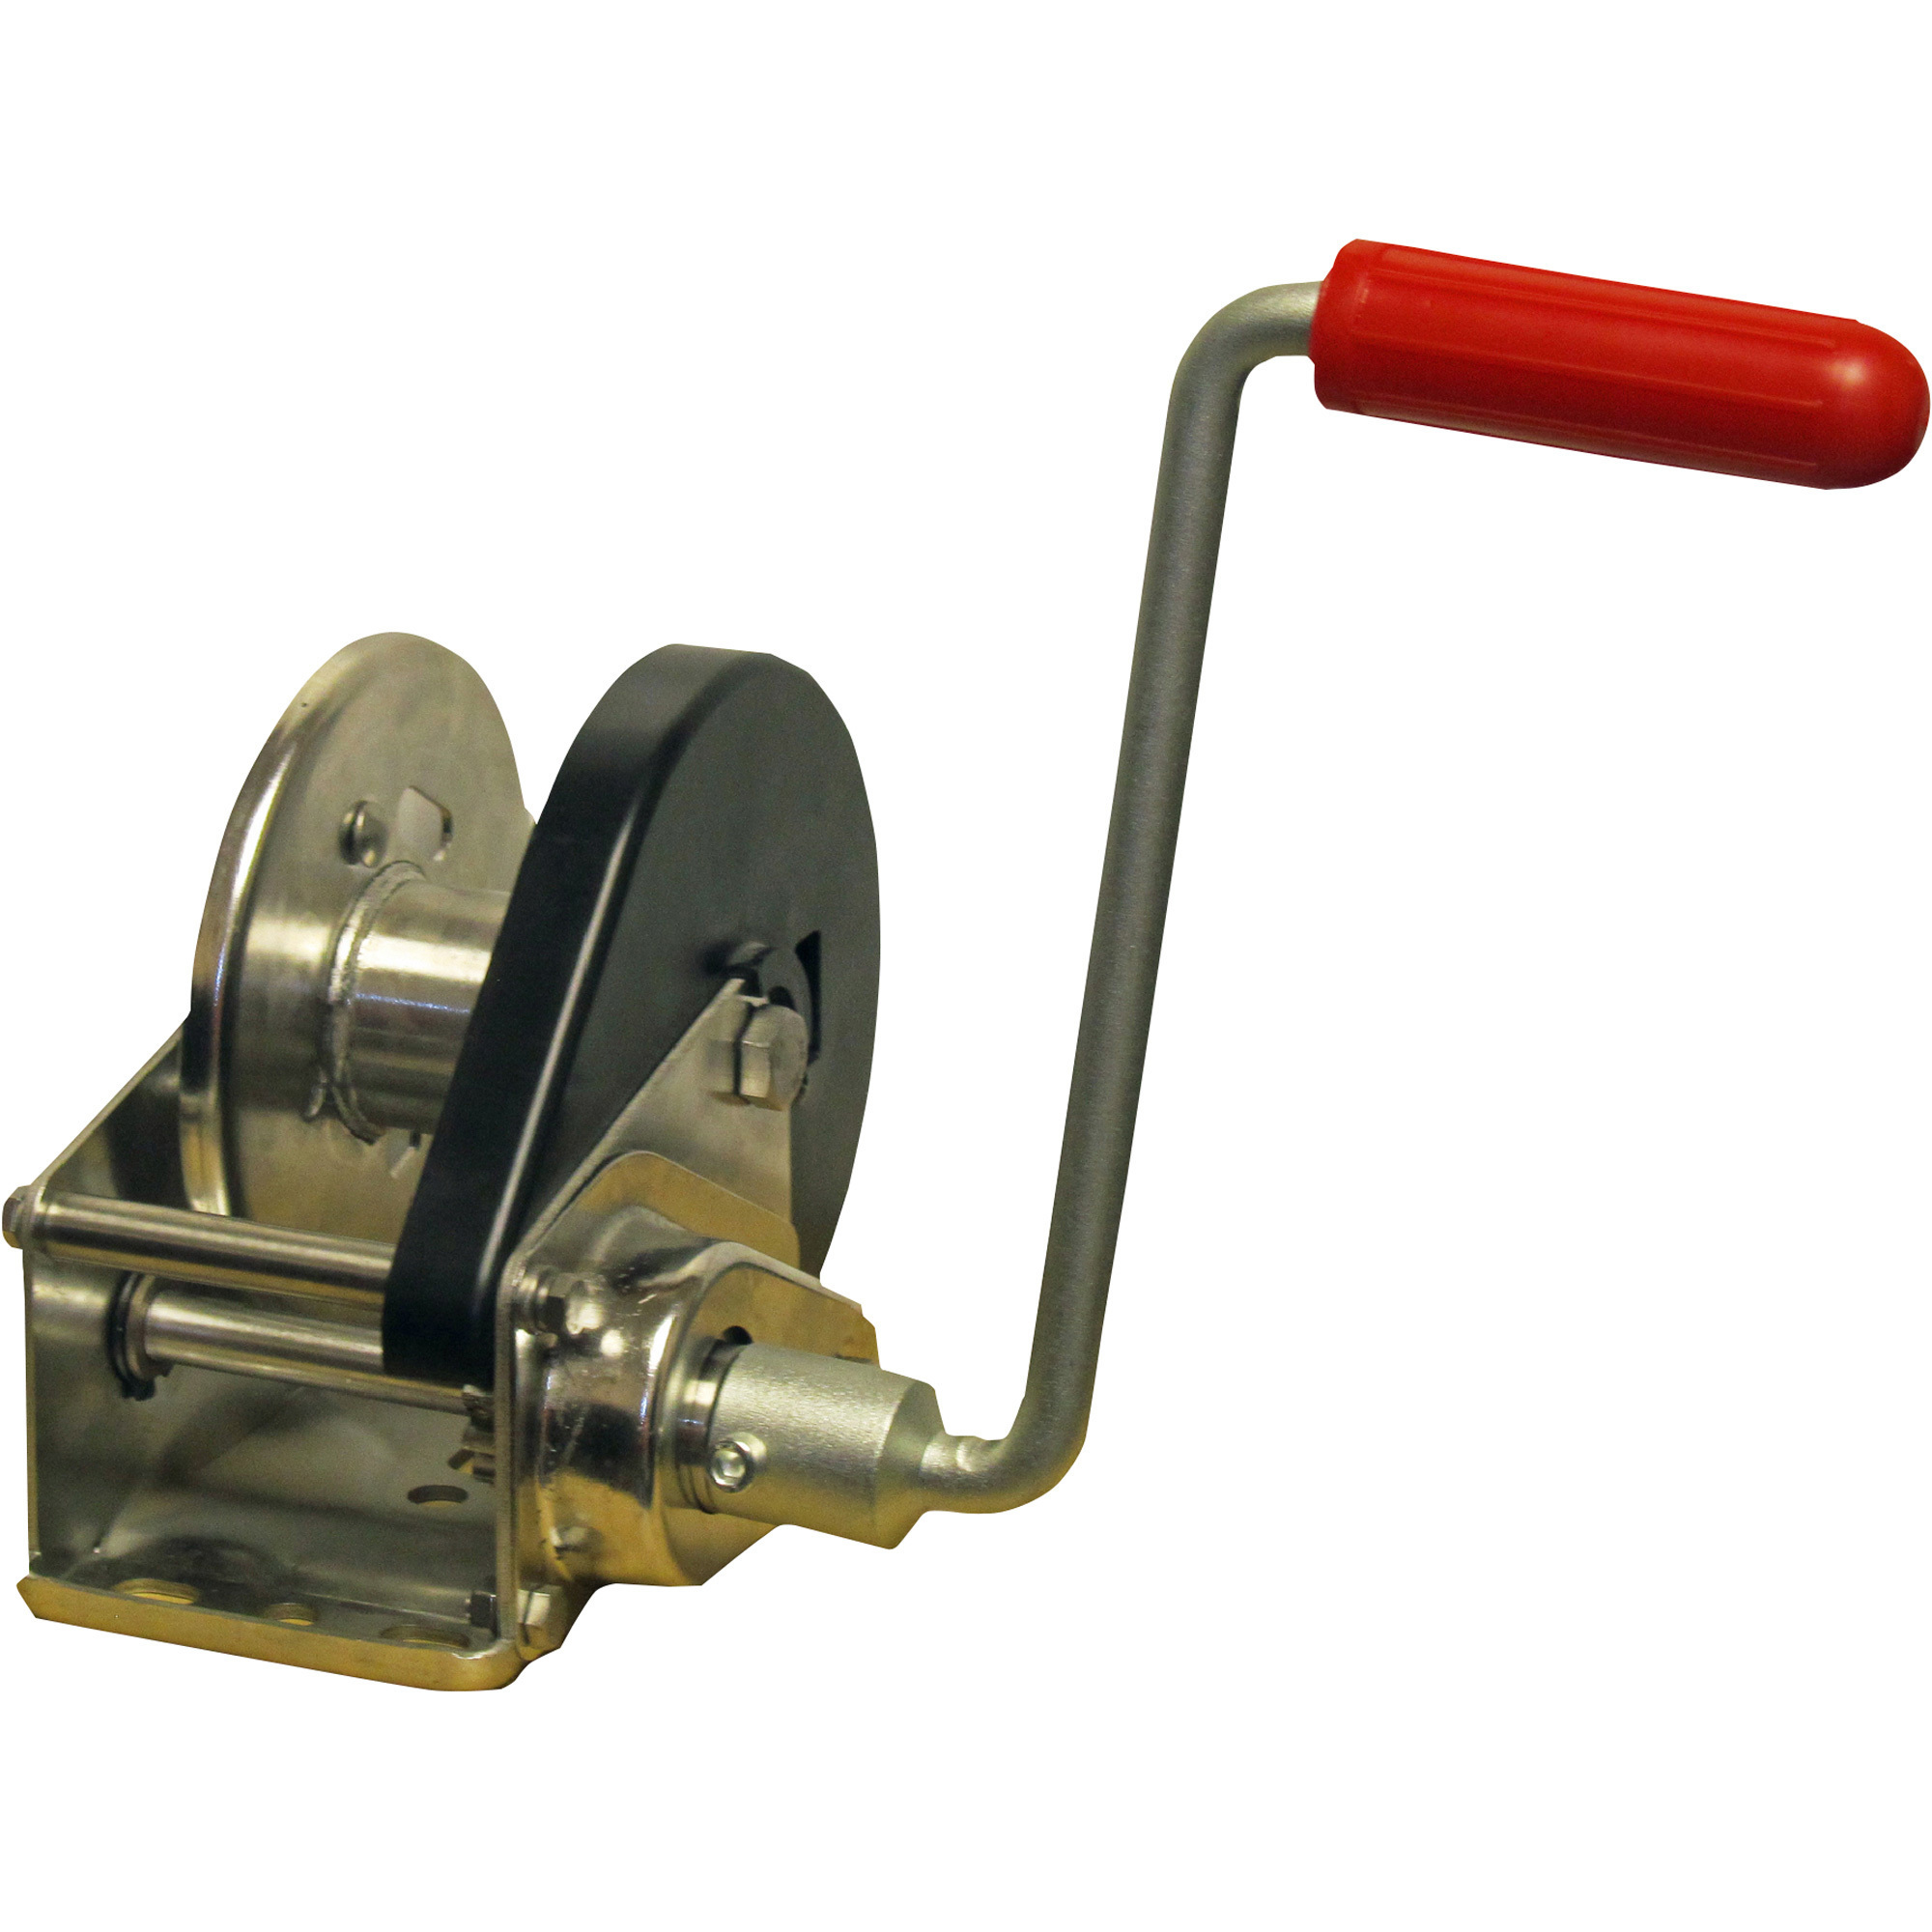 Endurance Marine Stainless Steel Hand Winch With Auto Brake, No Cable, Model EABW1200SS